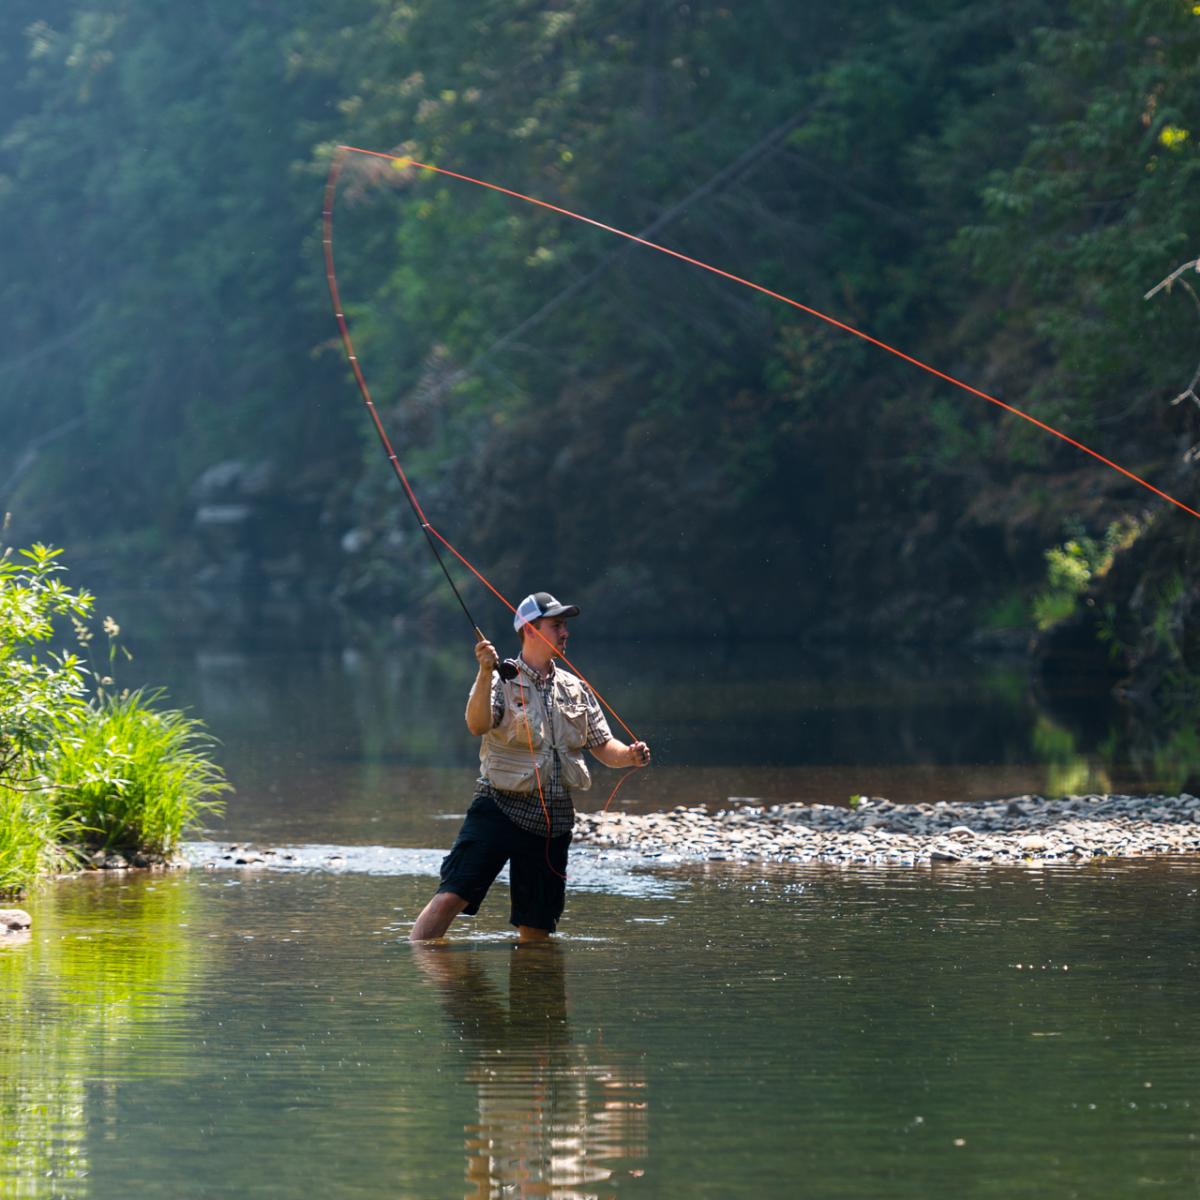 A person in a stream fly-fishing.